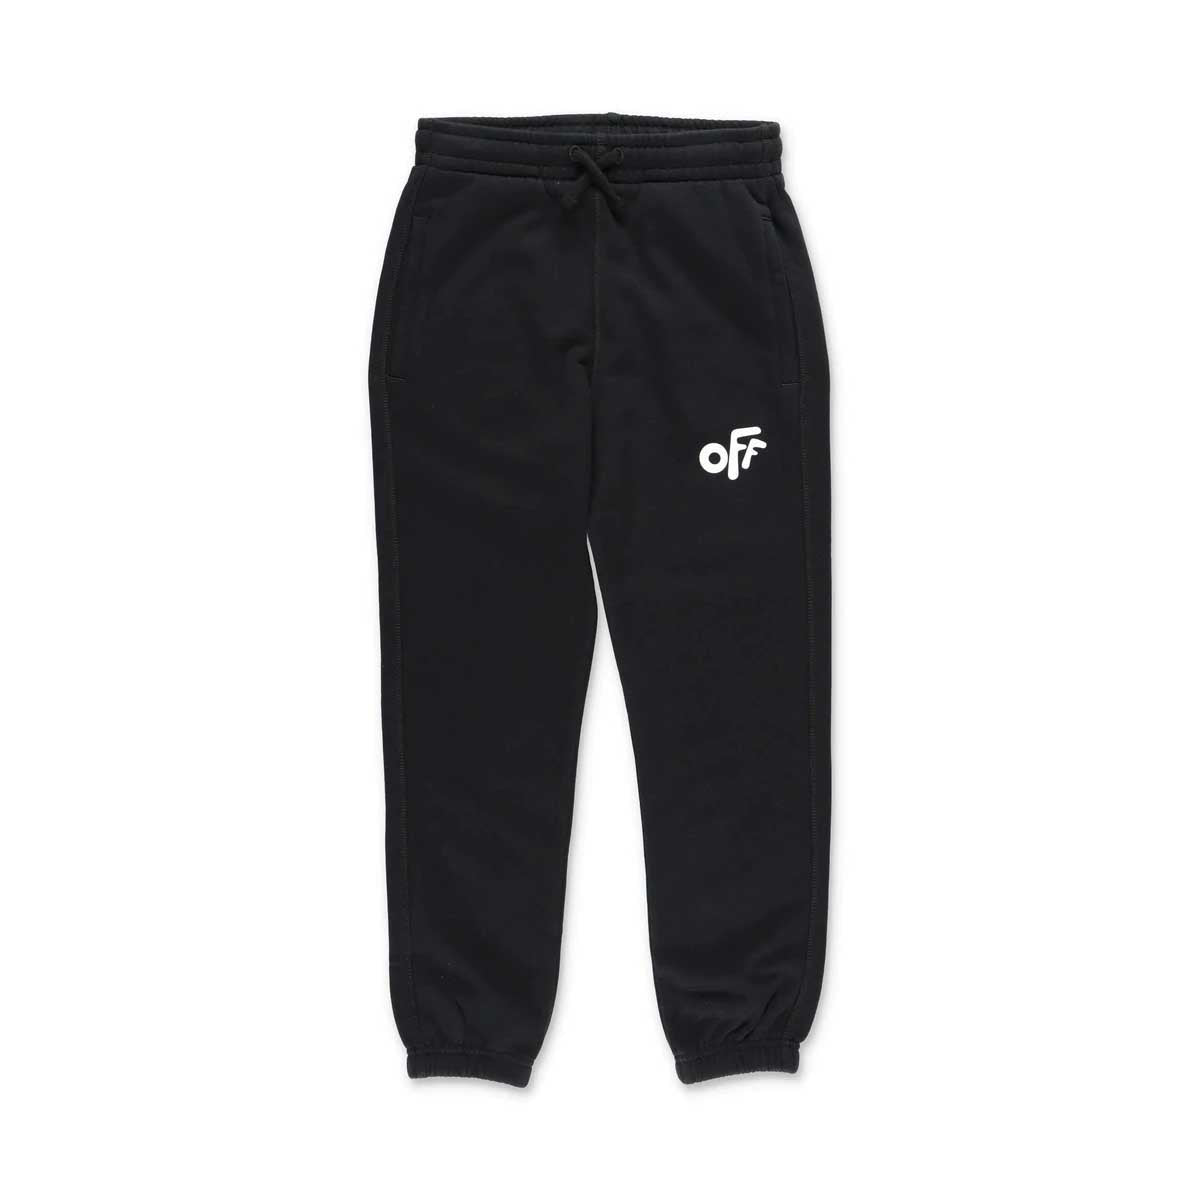 Kids off rounded sweatpants black